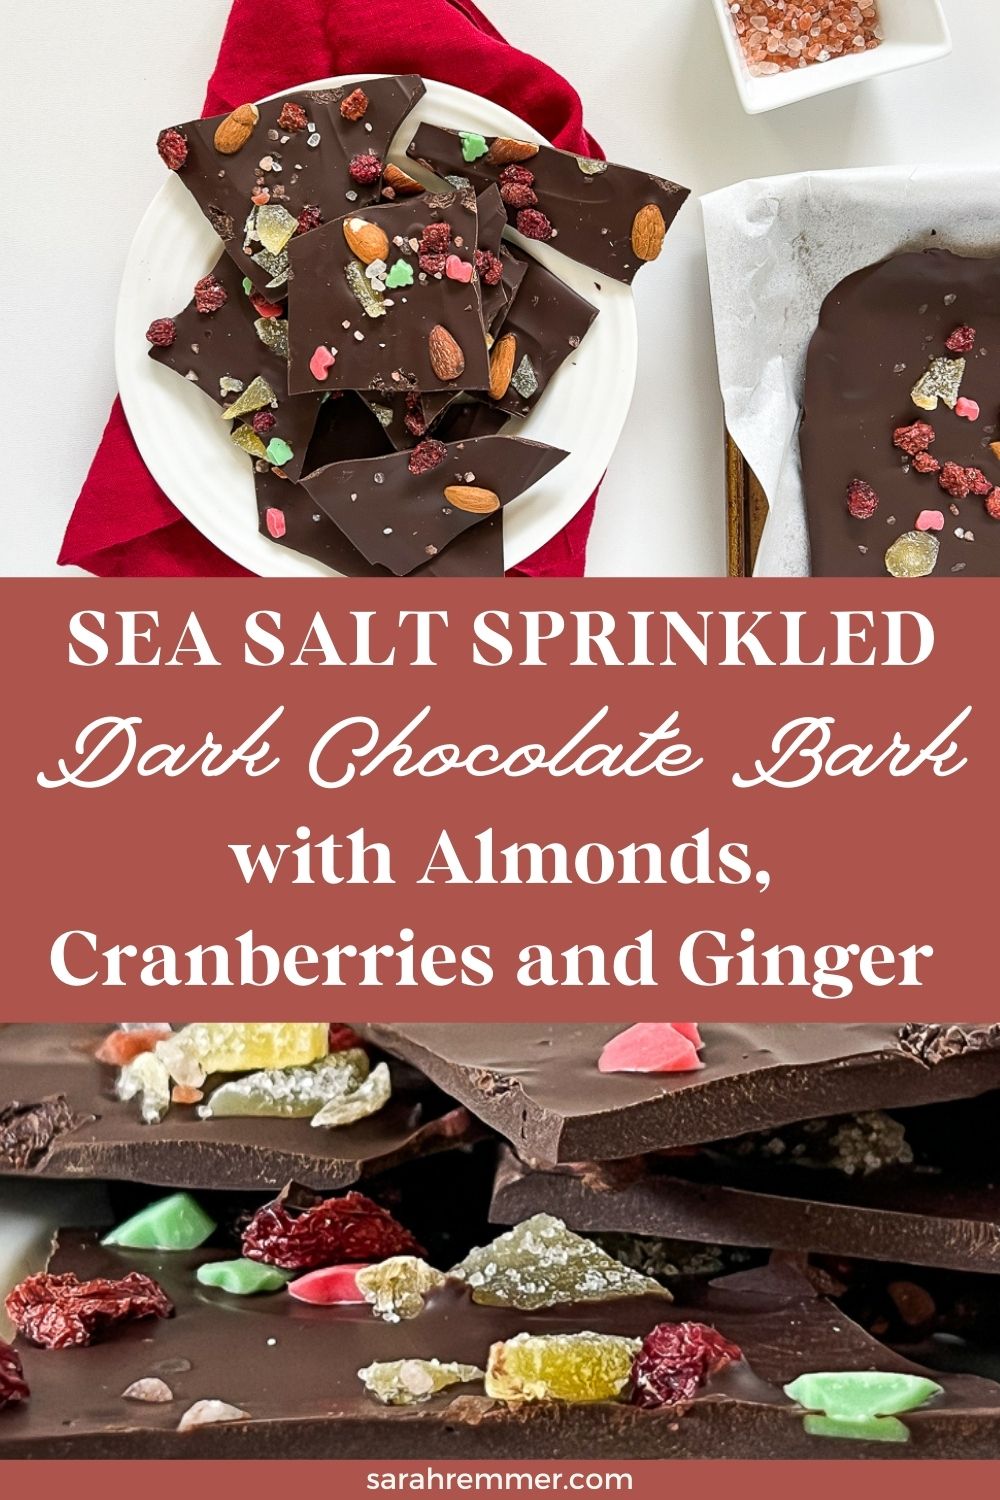 If you’re looking for a delicious, flavorful holiday treat that looks beautiful, will impress a crowd and takes less than 30 minutes to make, this sweet, spicy and salty dark chocolate bark is the recipe for you! 